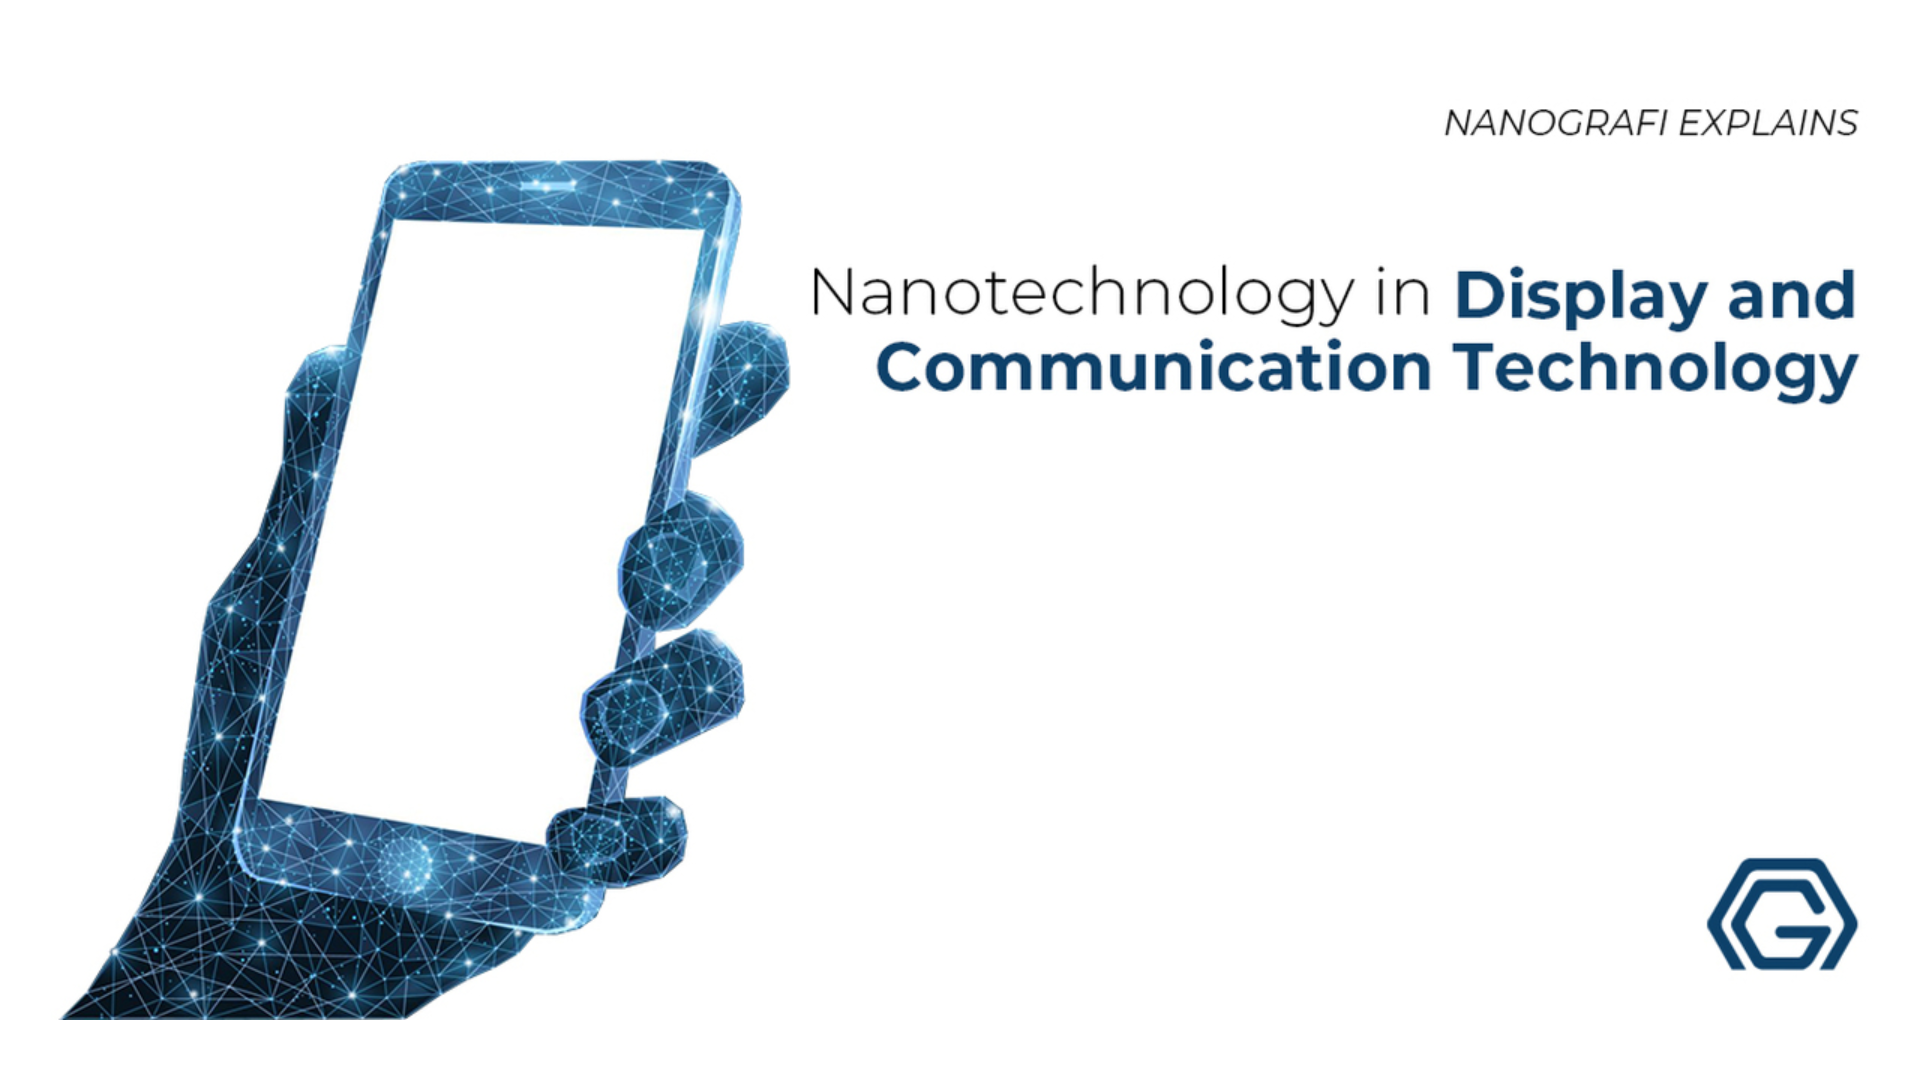 Nanotechnology in display and communication technology